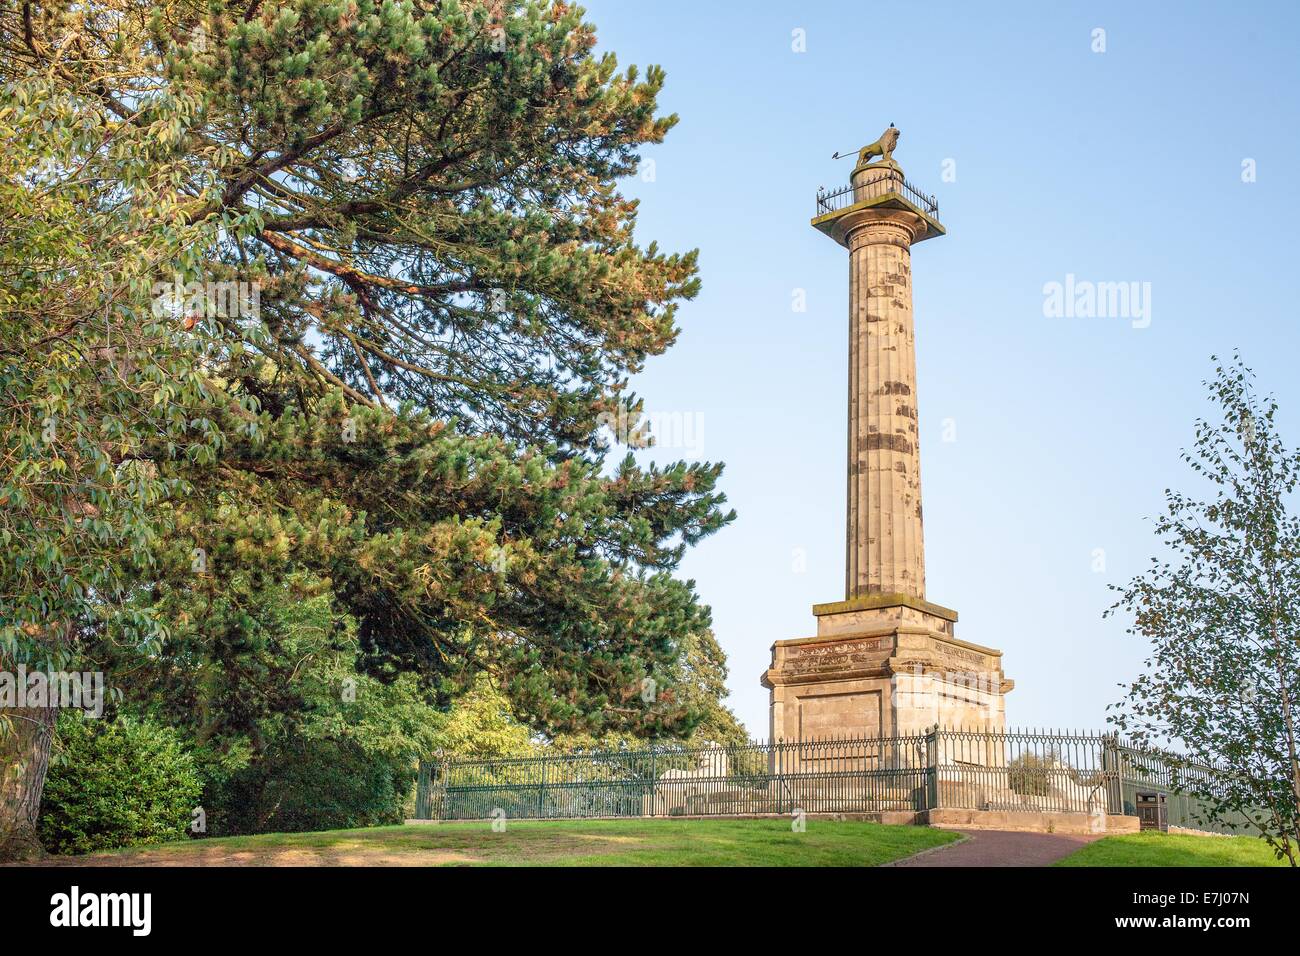 The Tenantry Column, a monument topped by the Percy Lion, symbol of the Percy  family in Alnwick  in Northumberland, England UK Stock Photo